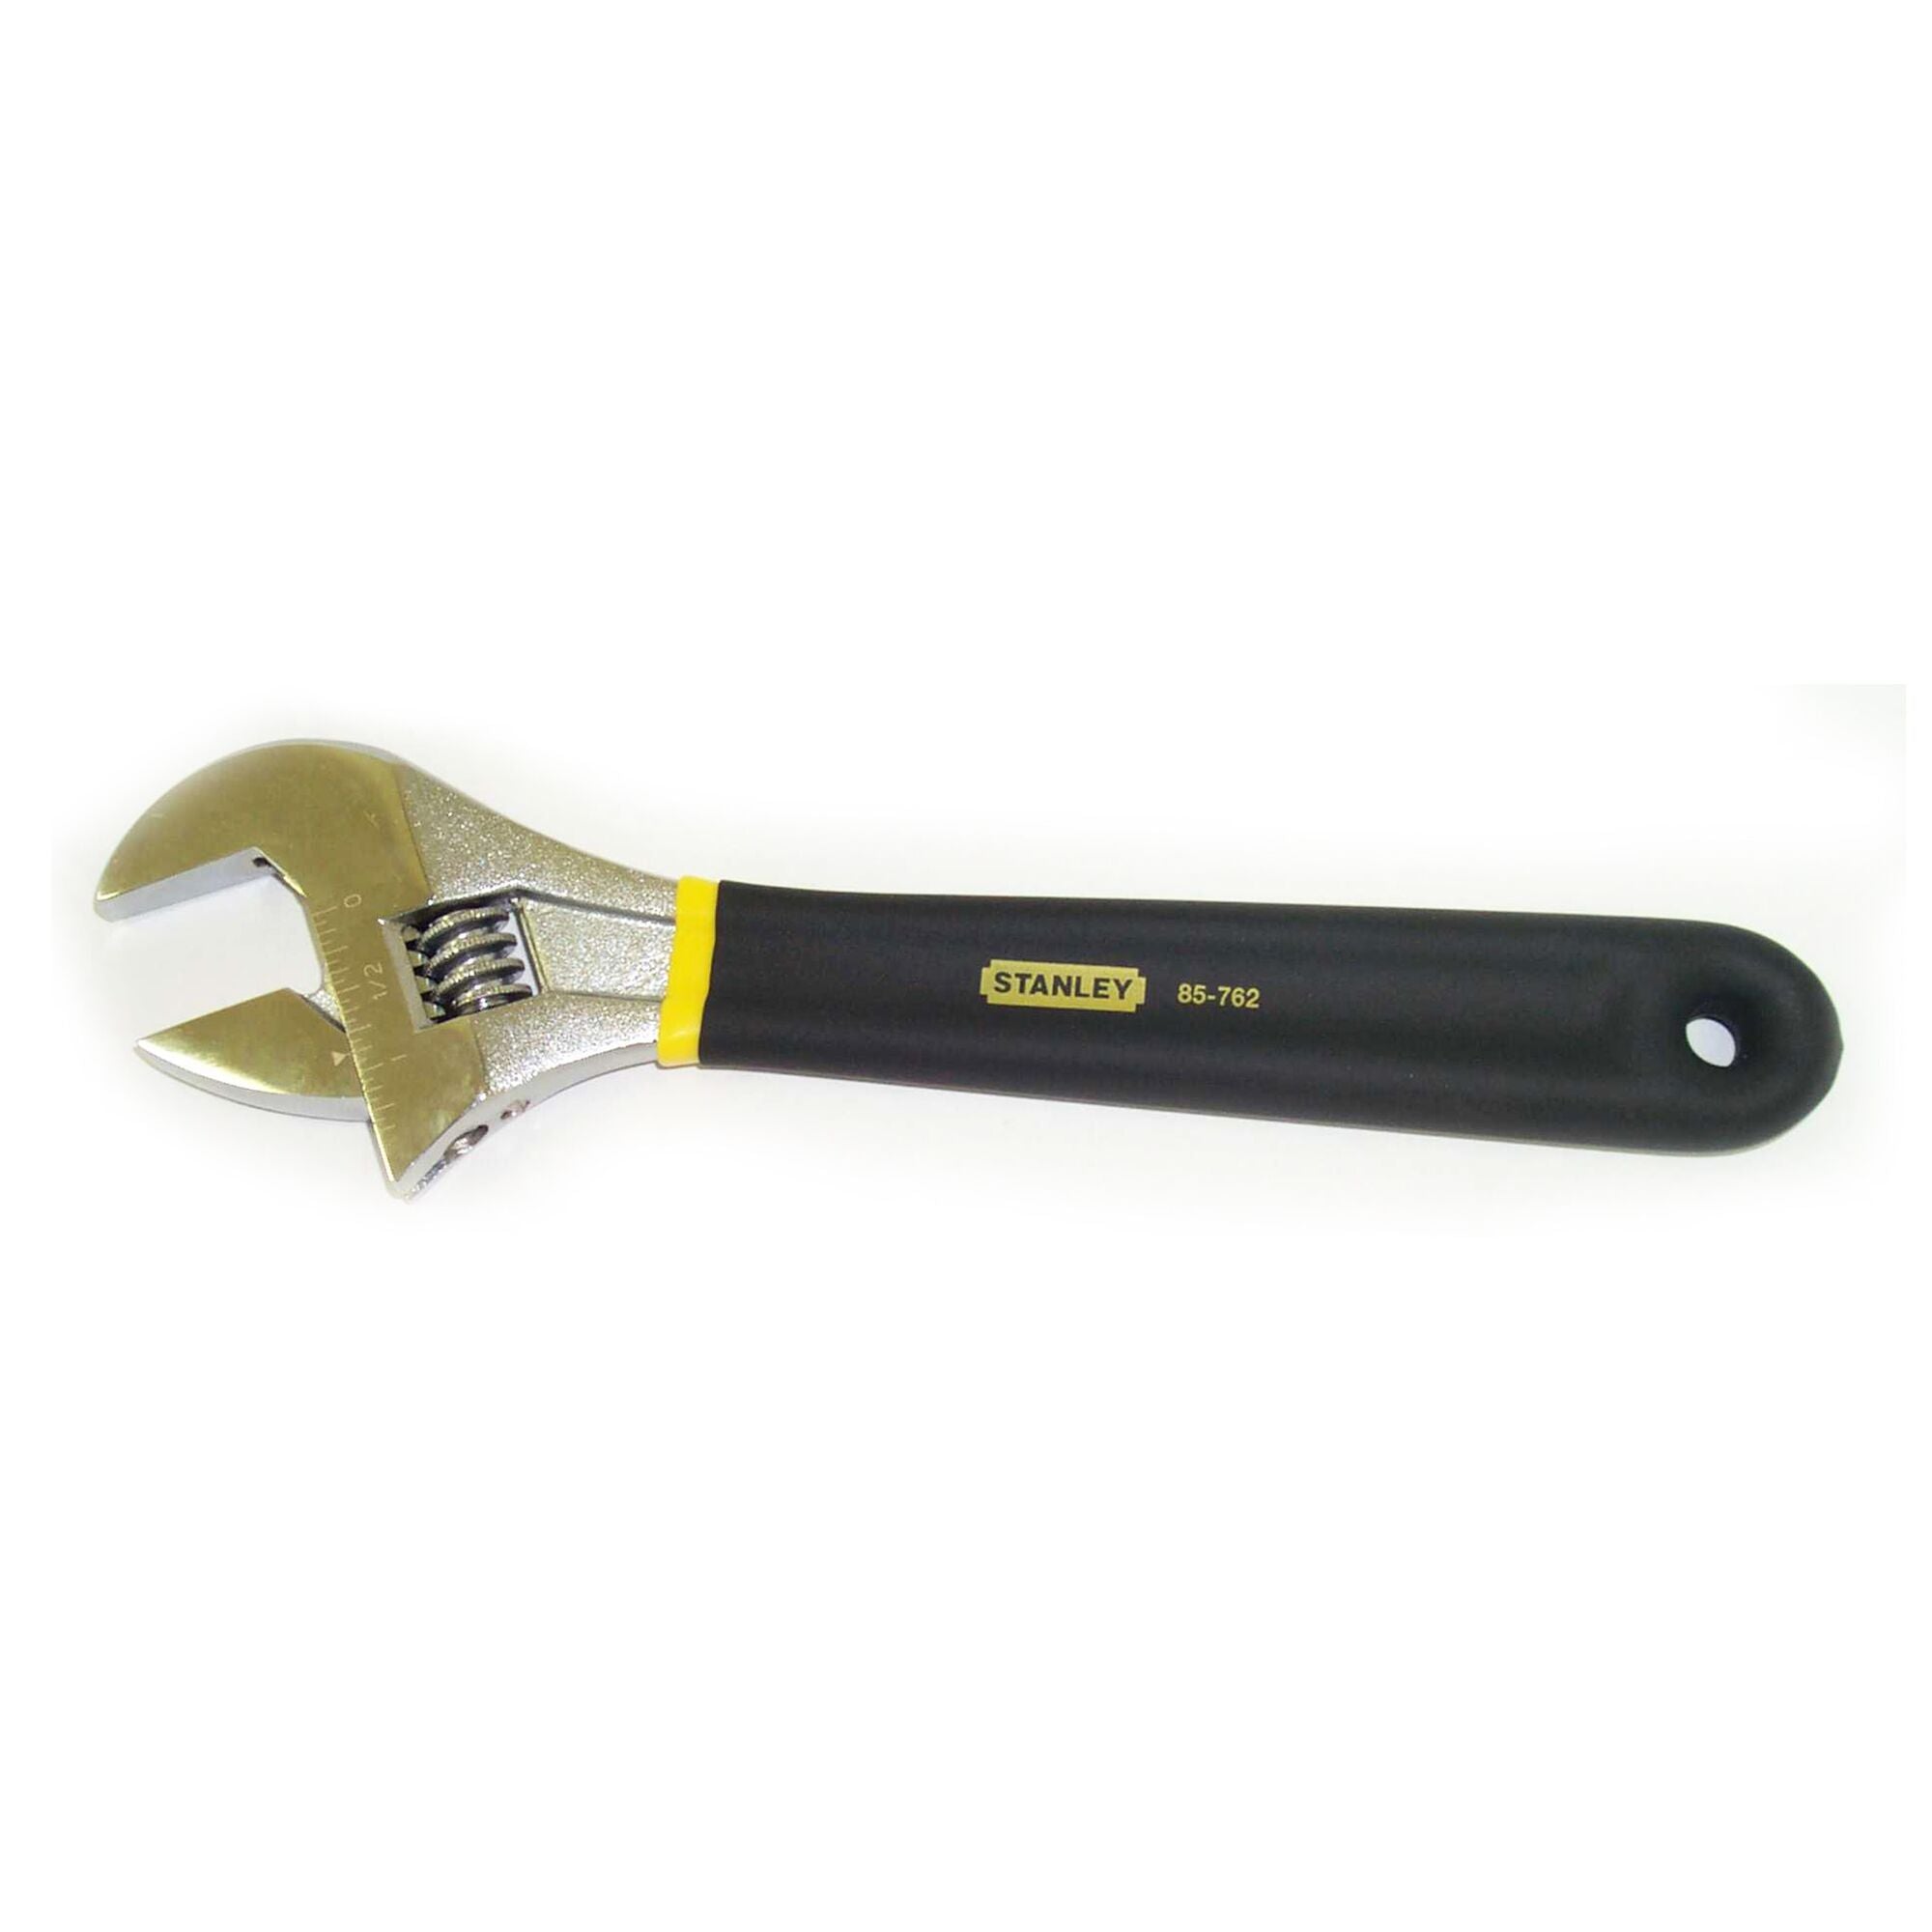 Adjustable Wrench - 250mm/10" Cushion Grip